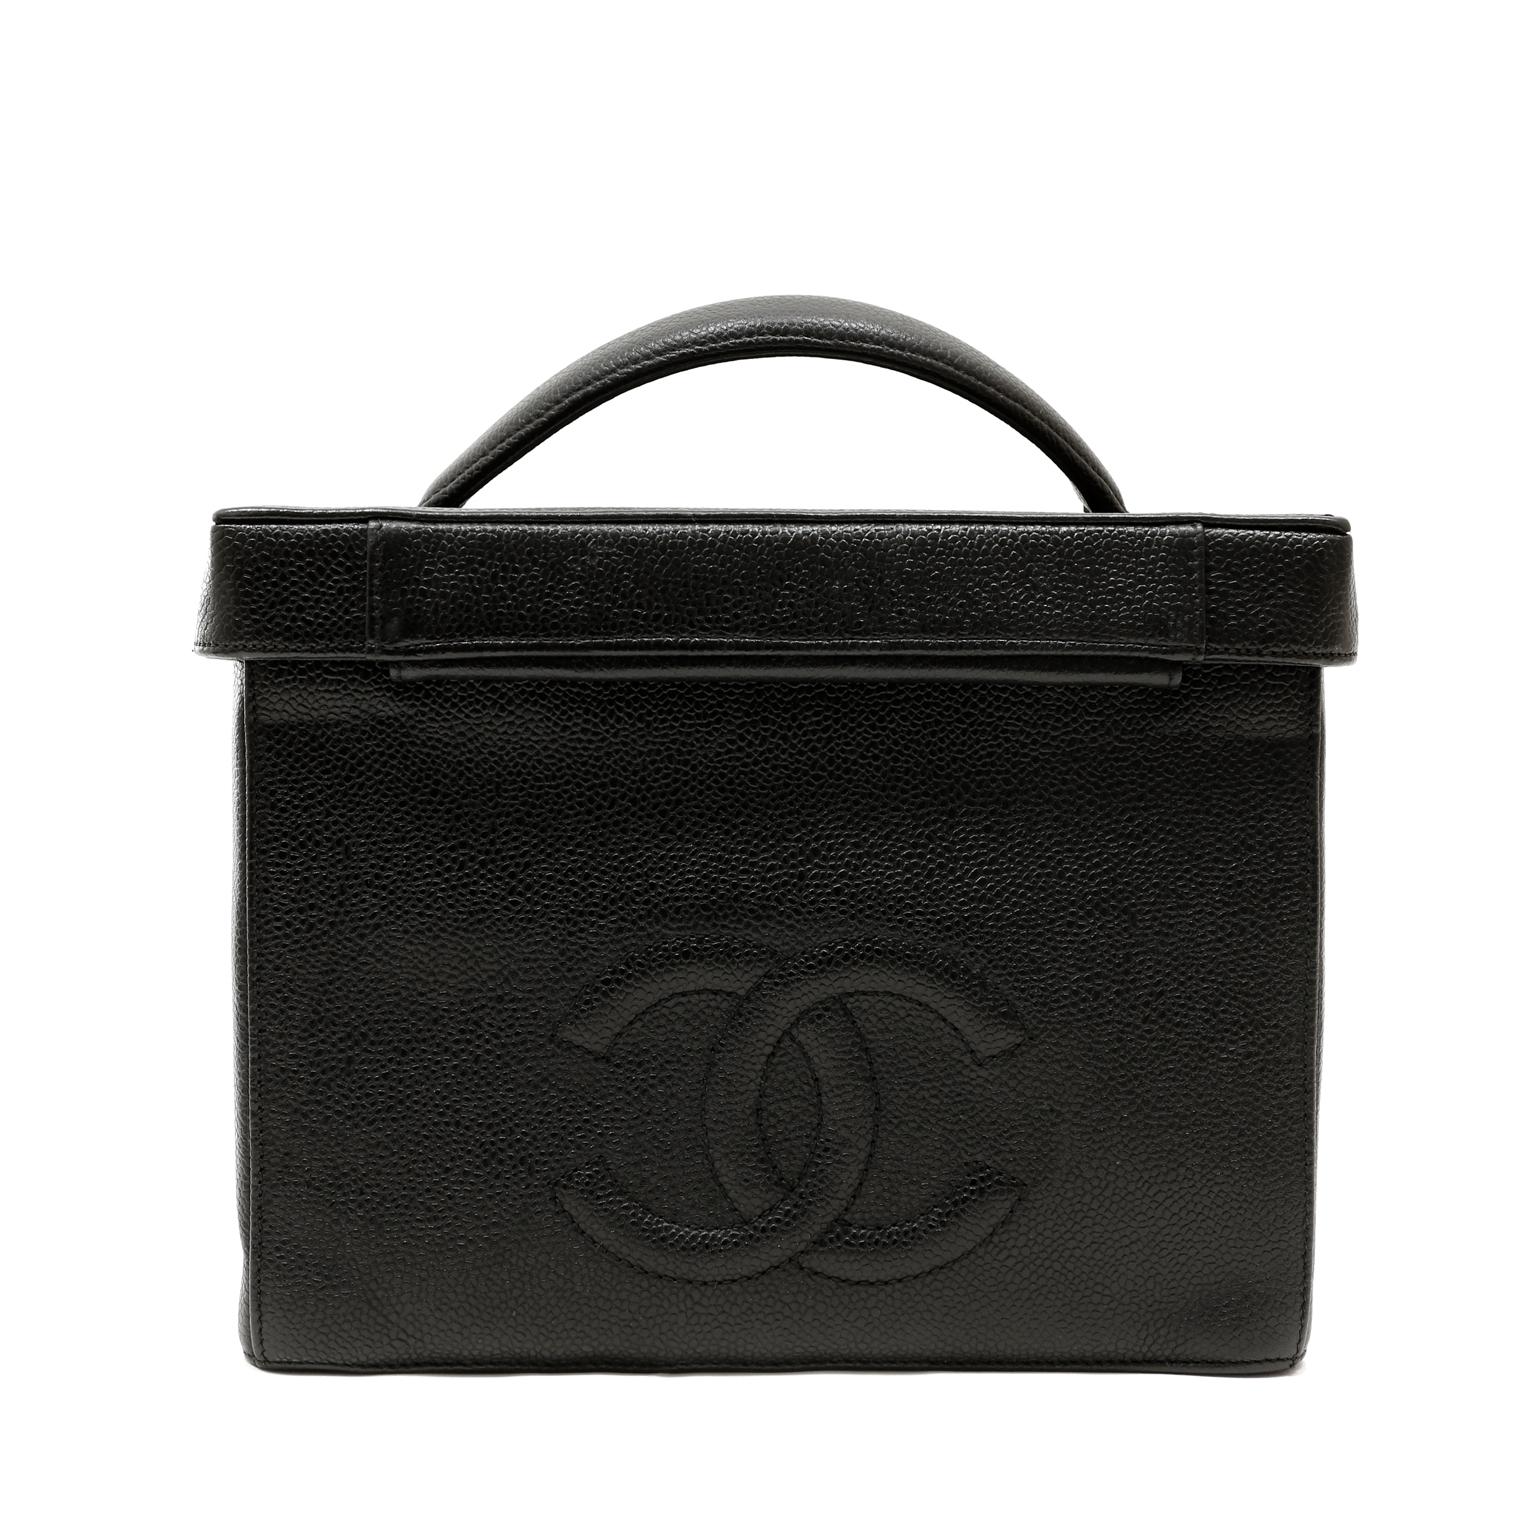 This authentic Chanel Black Caviar Large Vanity Case is a vintage piece in good condition from the mid 1990's.   Durable black textured caviar leather with gold tone interlocking CC twist lock.  Hinged top with interior mirror. Interior side